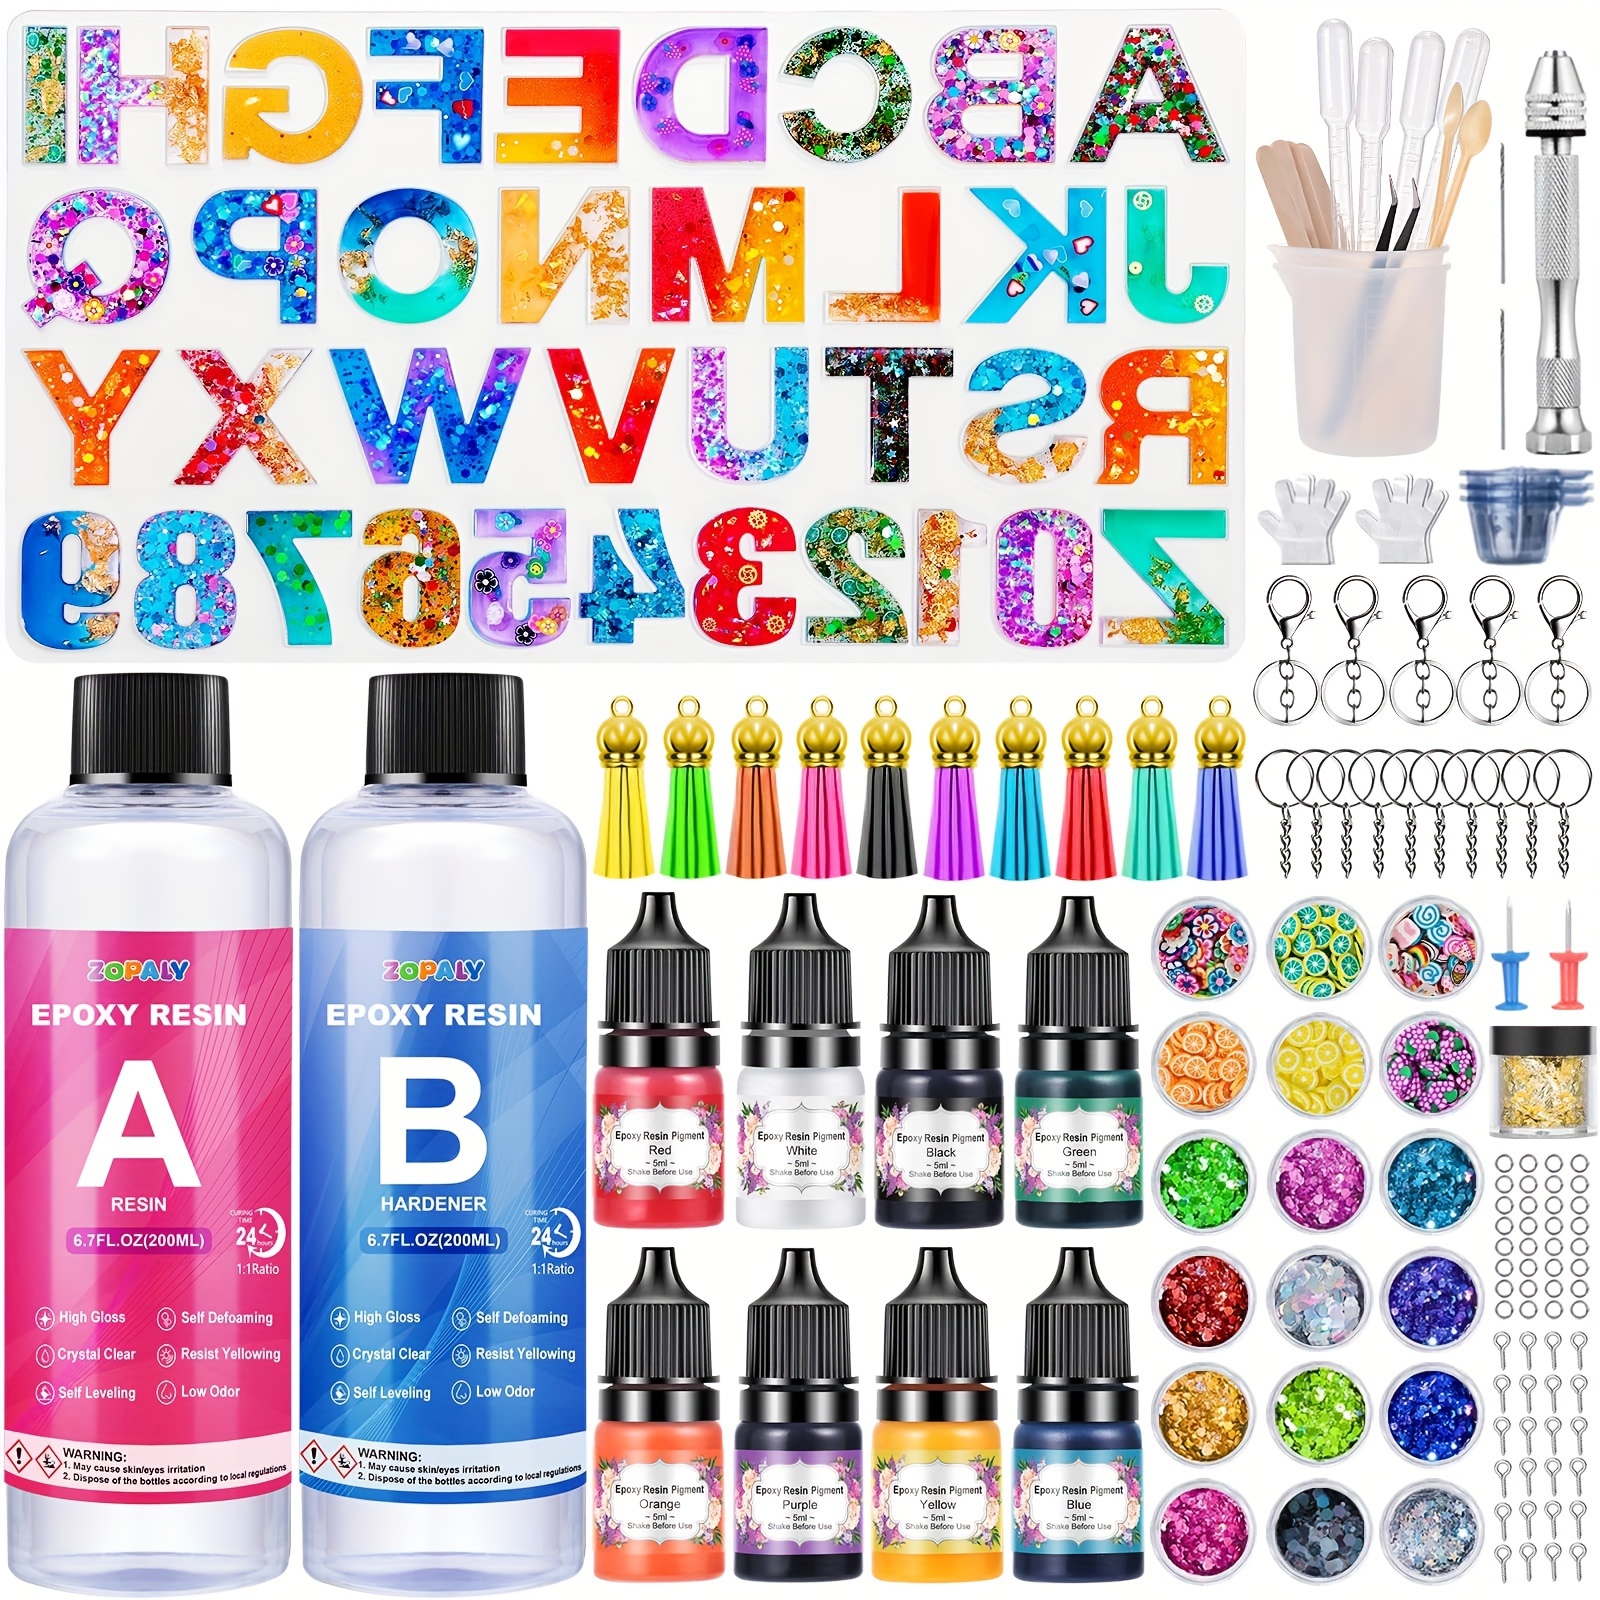 

Zopaly Epoxy Resin Kits For Beginners, 192 Pcs Letter Number Resin Moulds Silicone Keyring Making Kit, With 400ml Clear Resin, Resin Accessories/pigment/glitter Sequin/gold Leaf/keychain Tassels